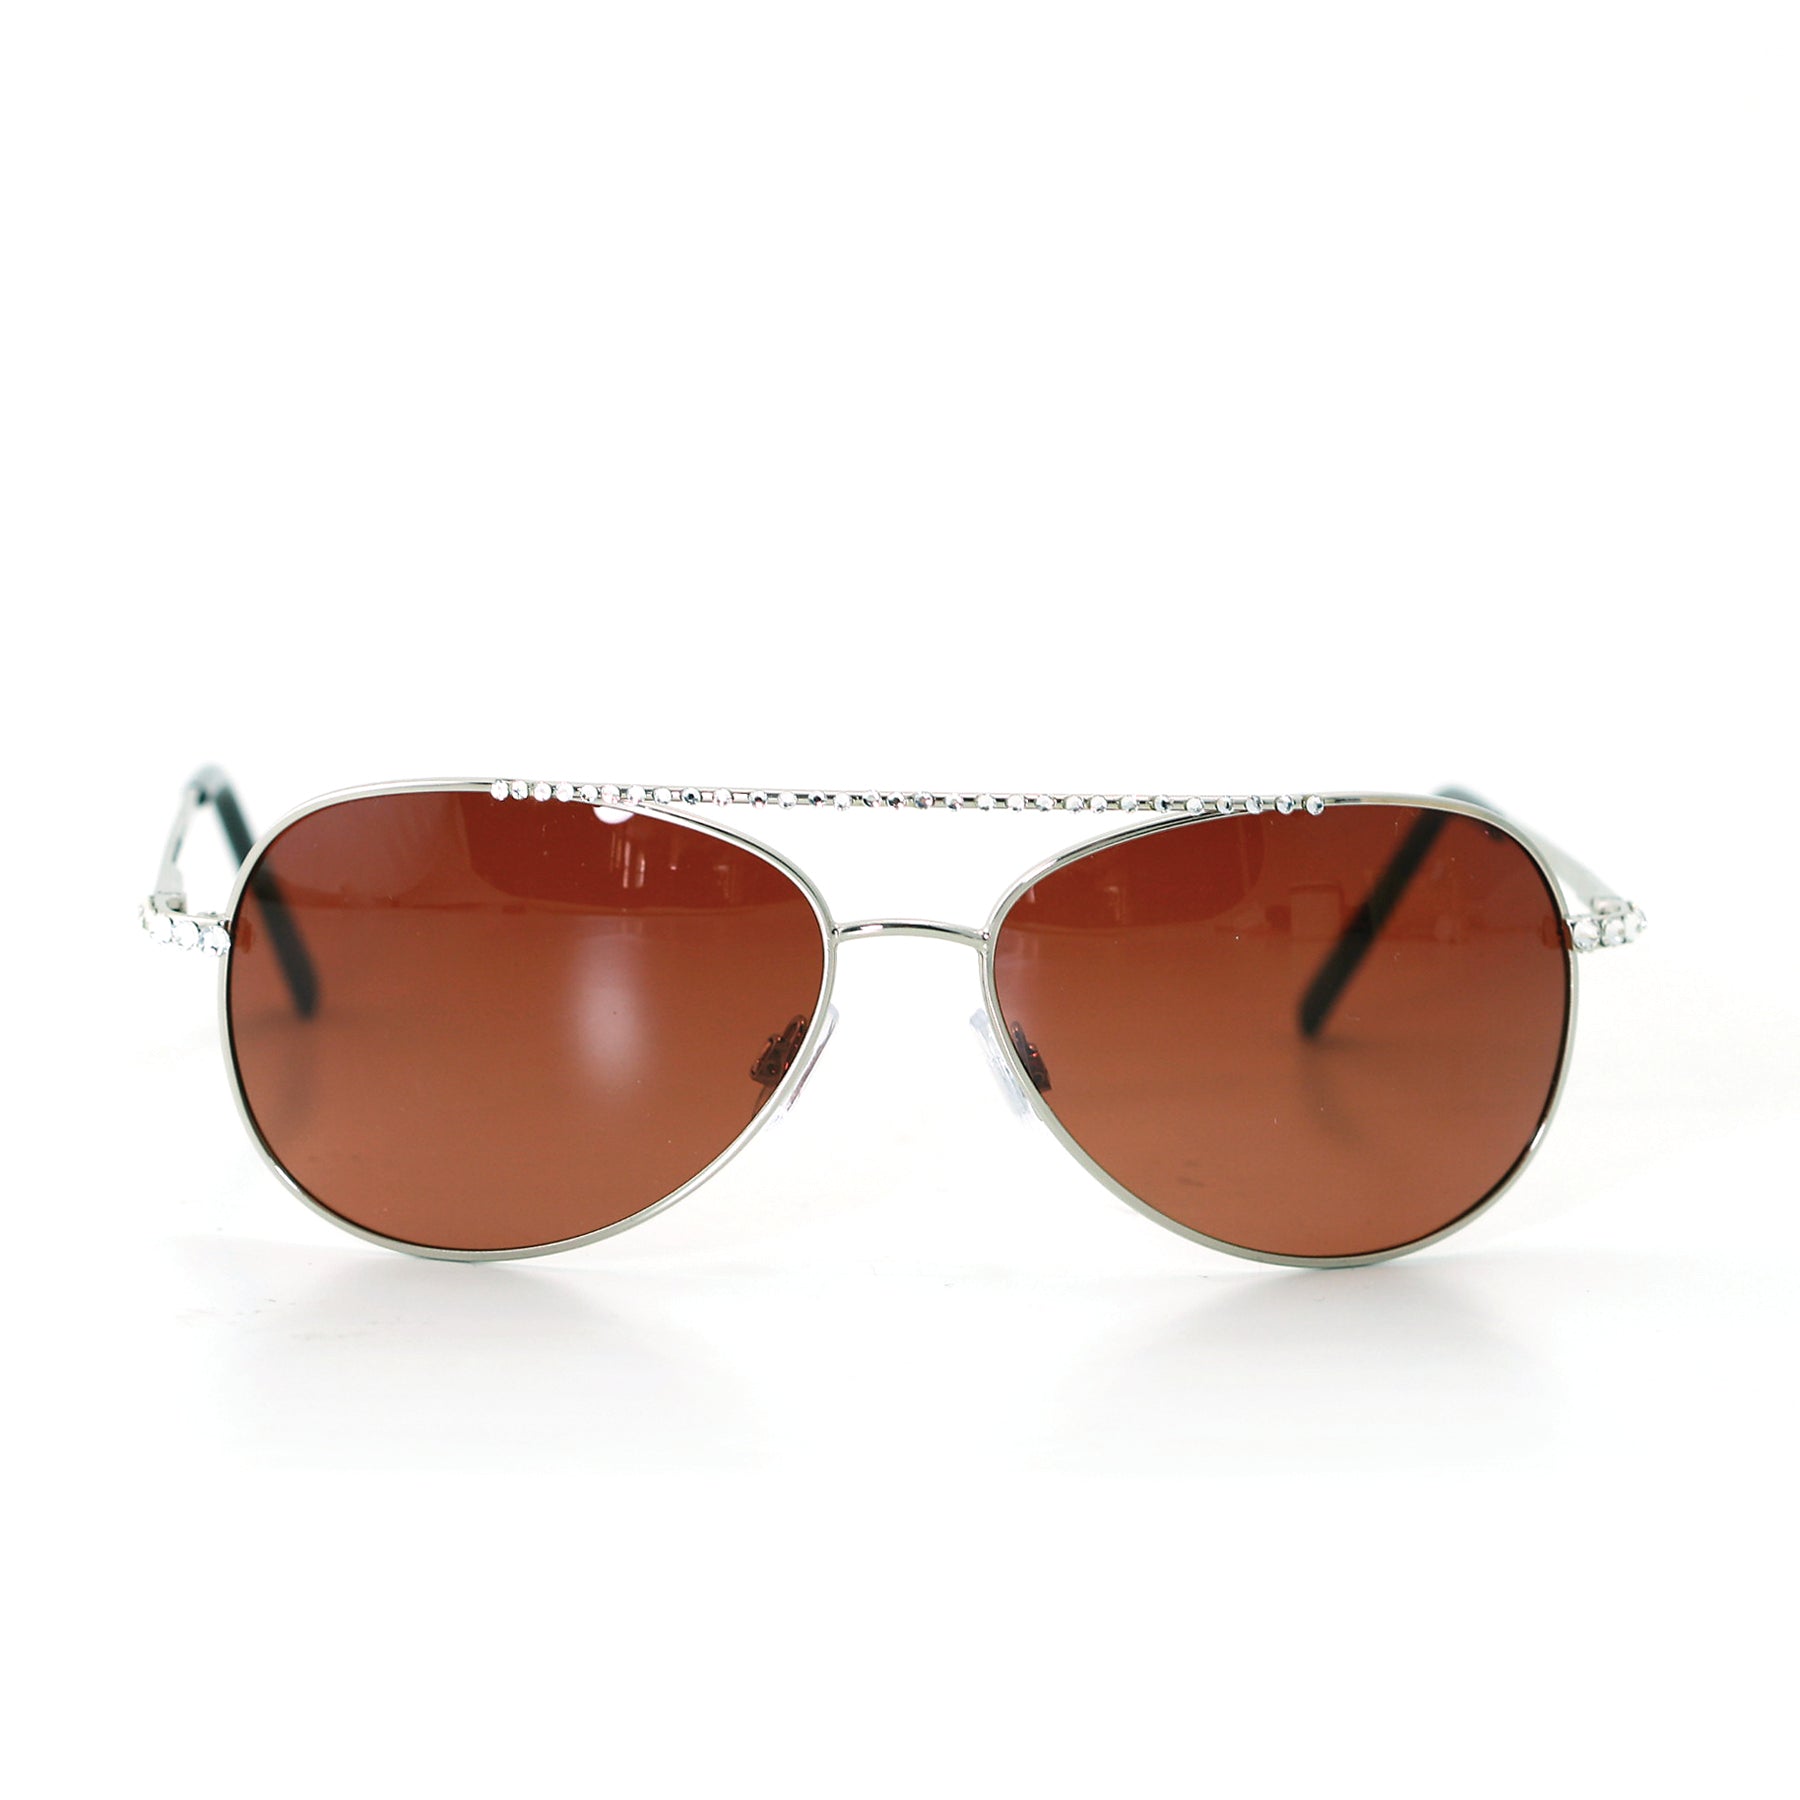 Sunglasses Made with Swarovski Elements, silver color, front view